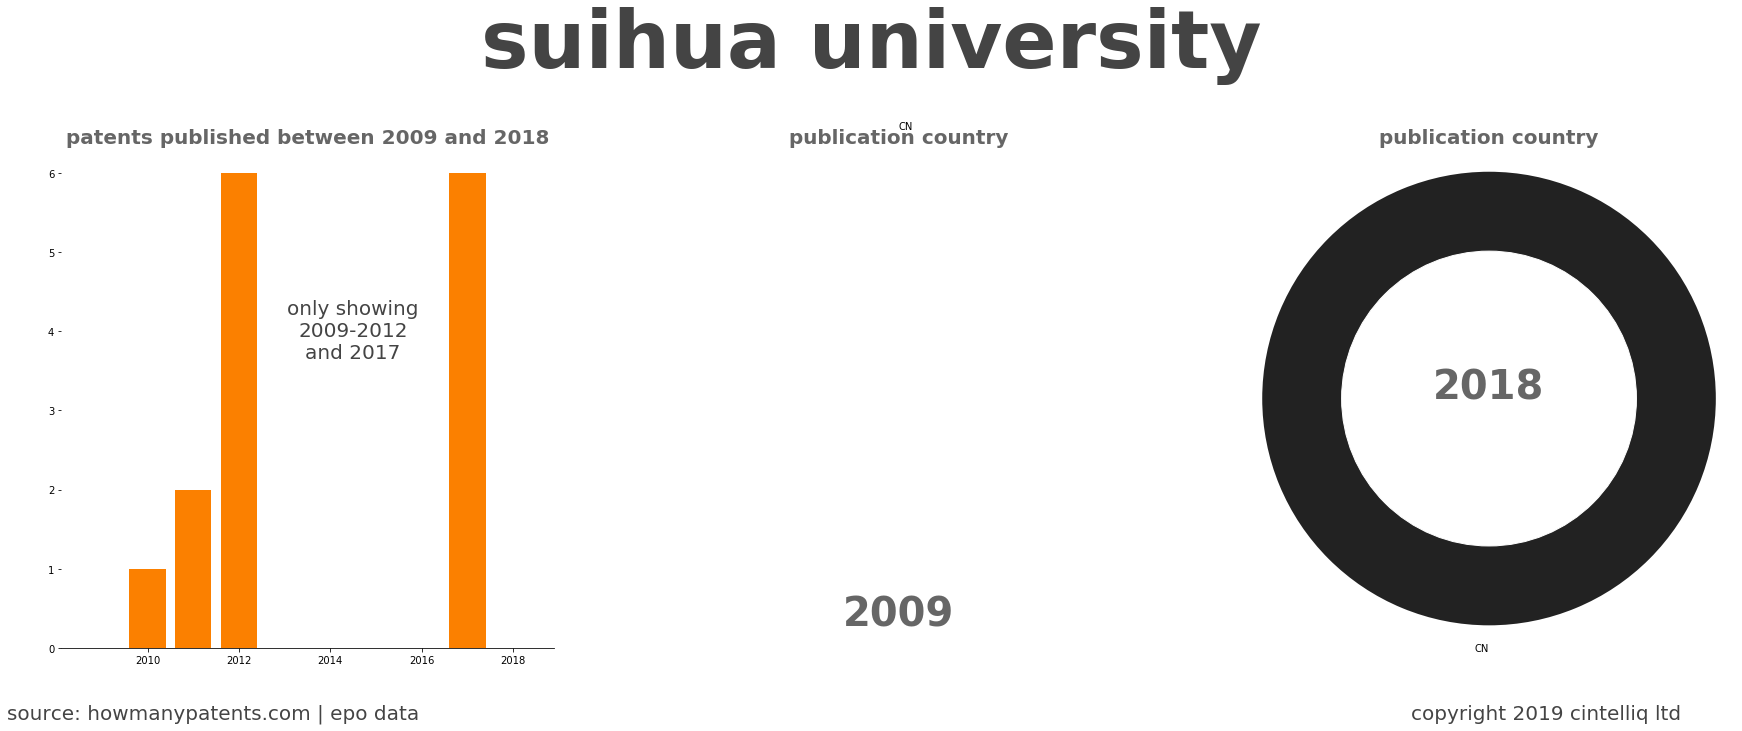 summary of patents for Suihua University